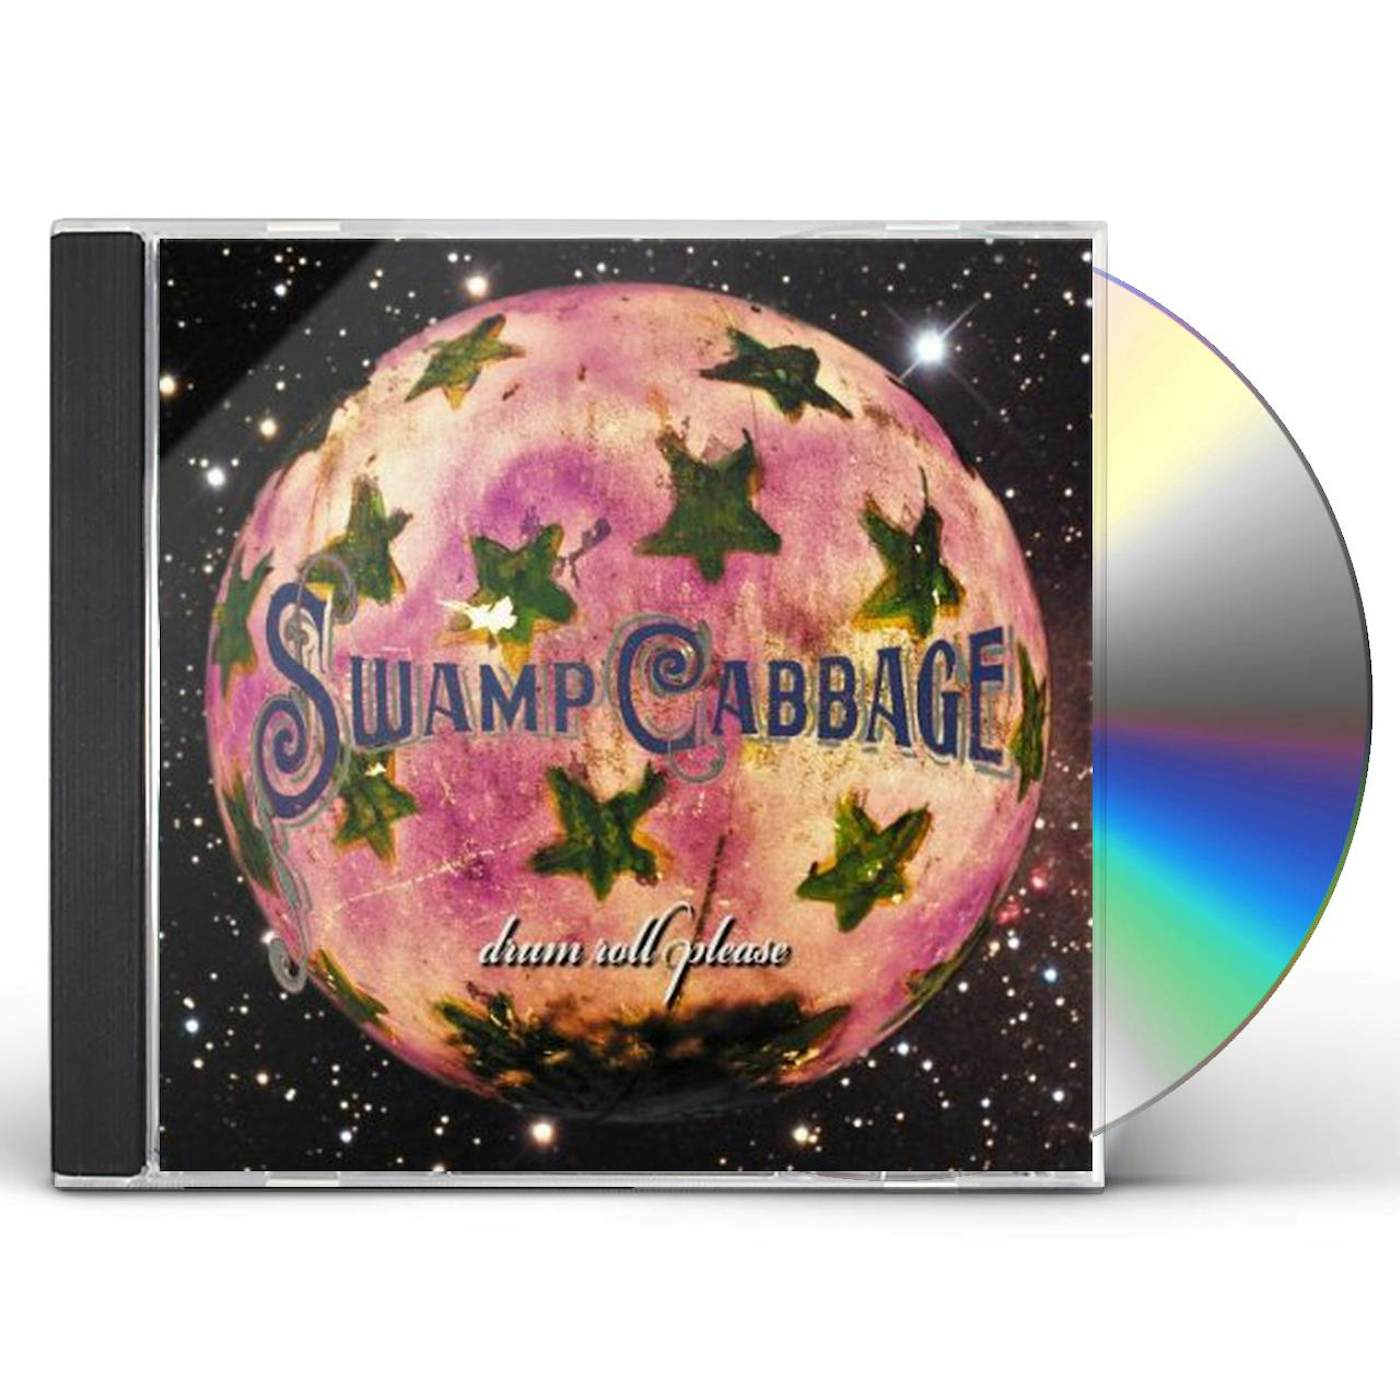 Swamp Cabbage DRUM ROLL PLEASE CD